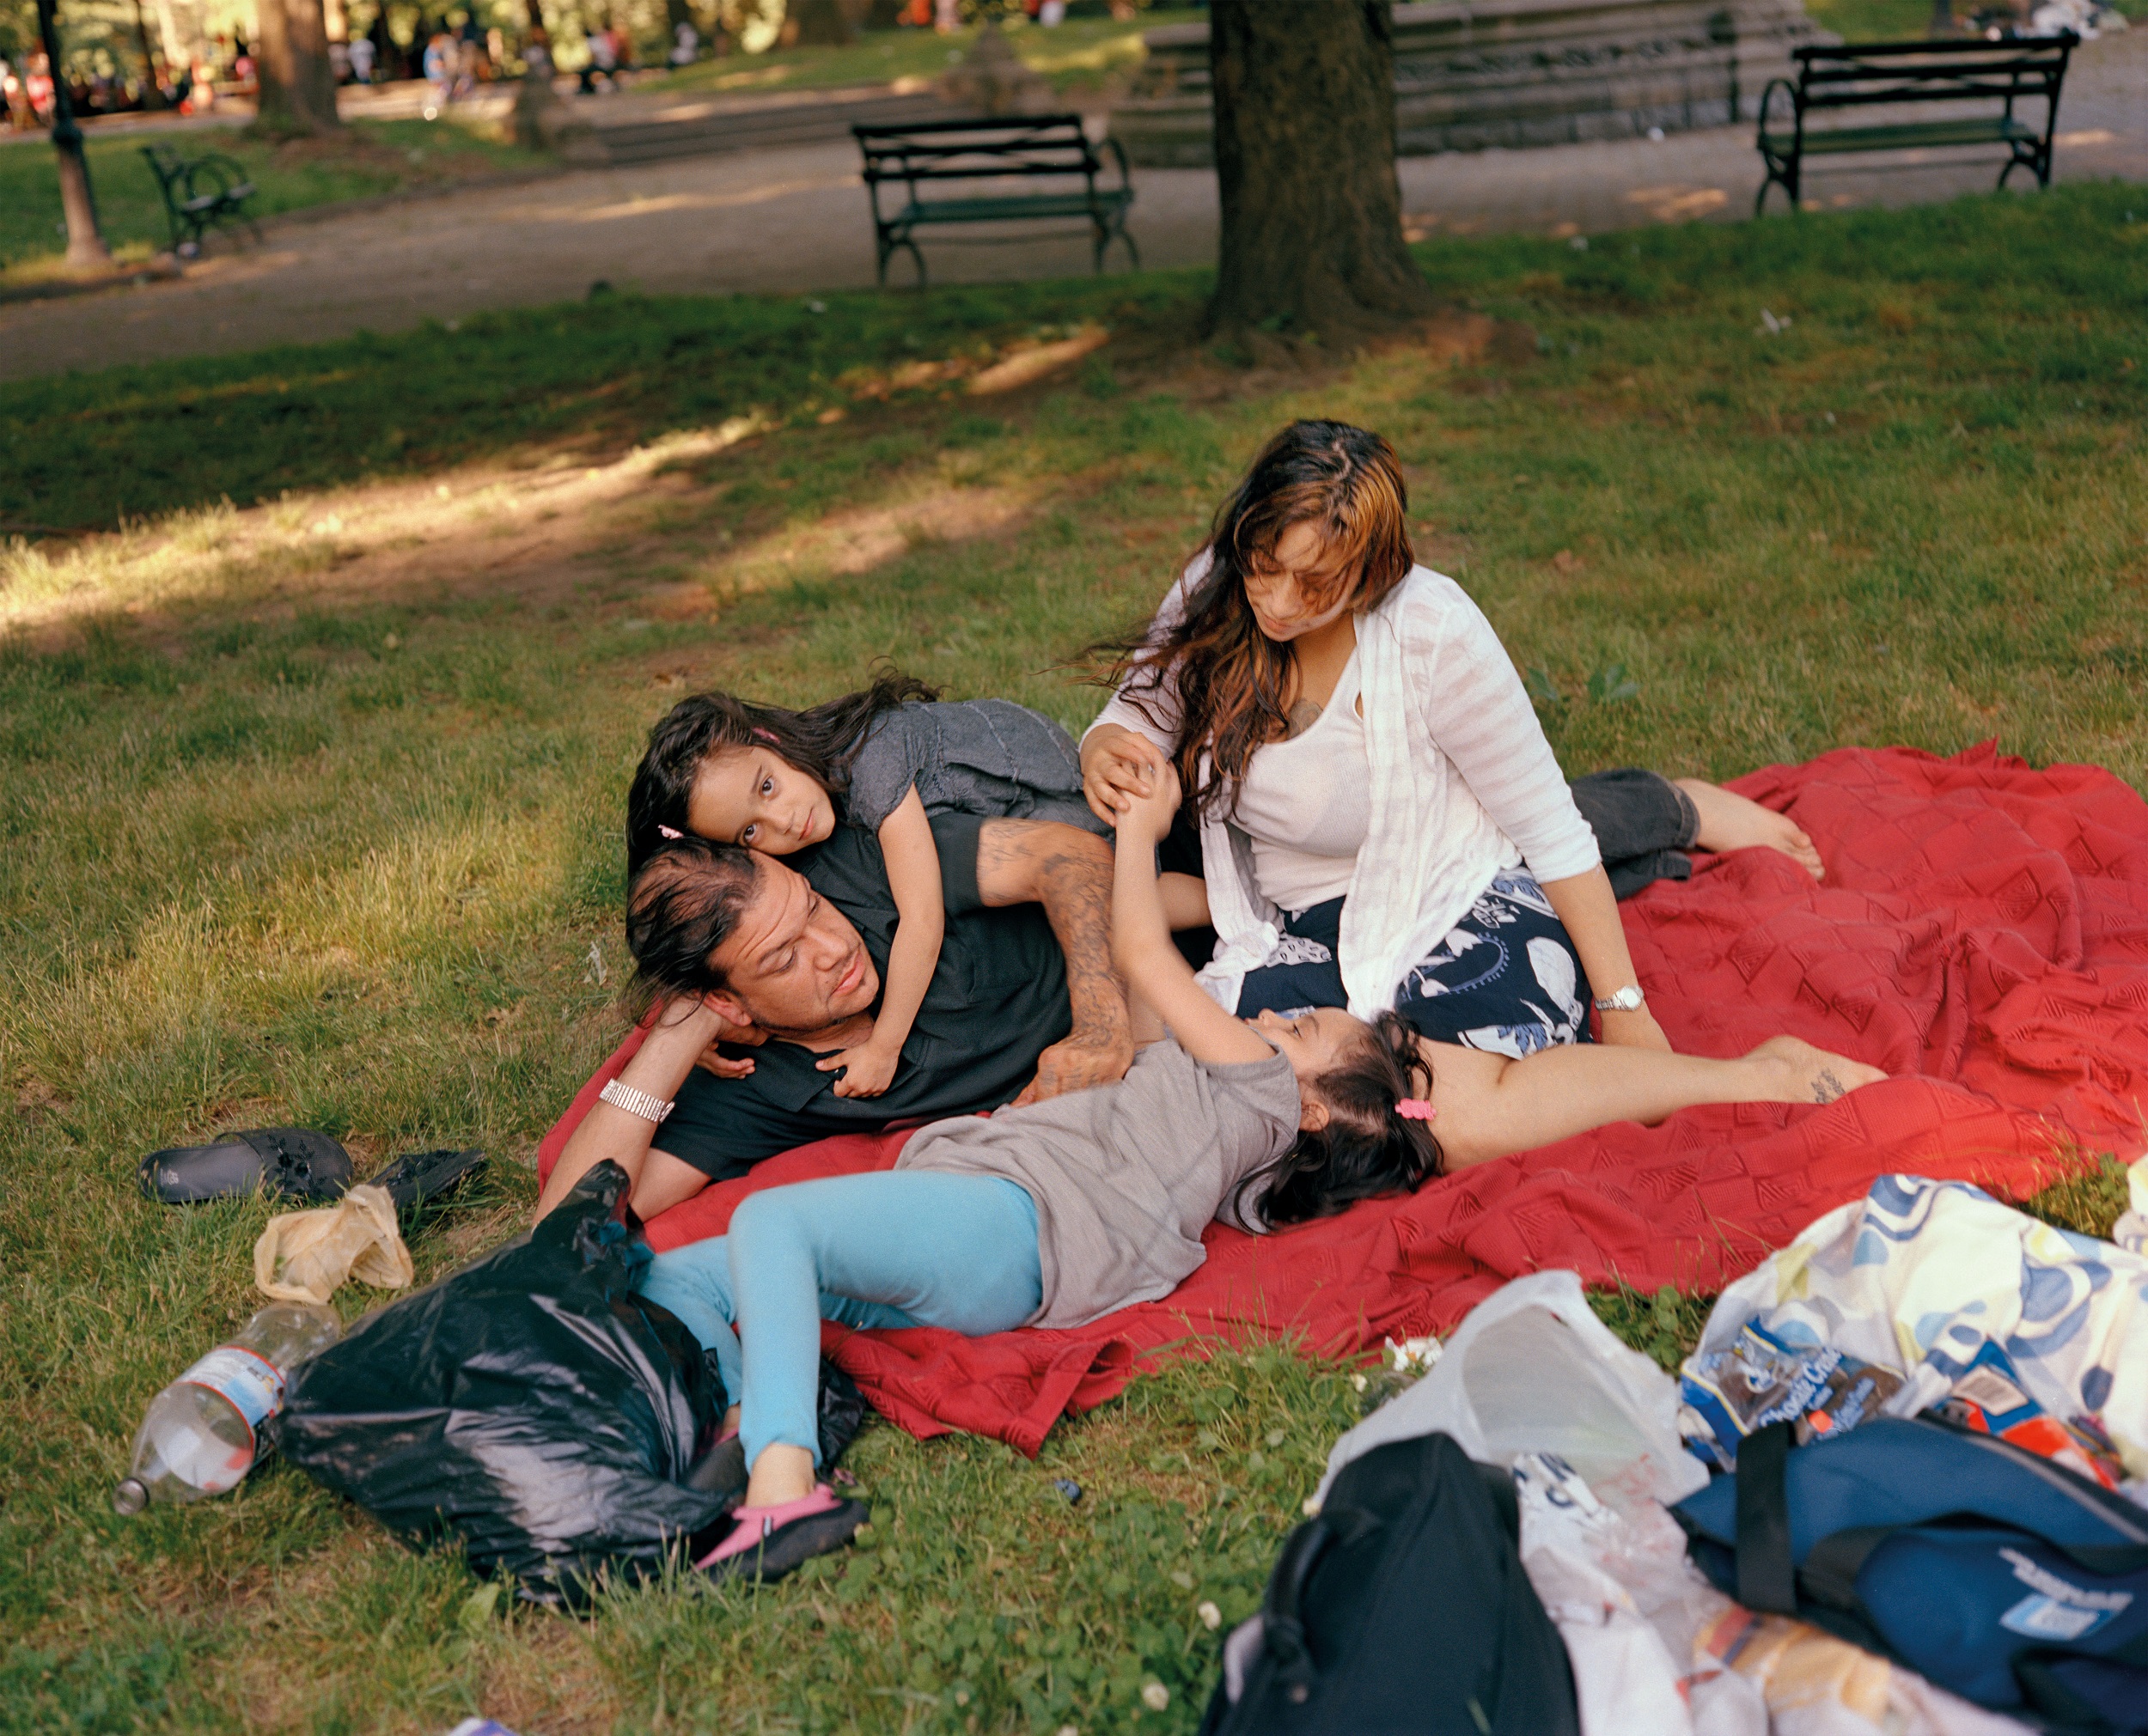 Color photograph of a man, woman, and two children picnicking on a red blanket in a park with grass, trees, and benches